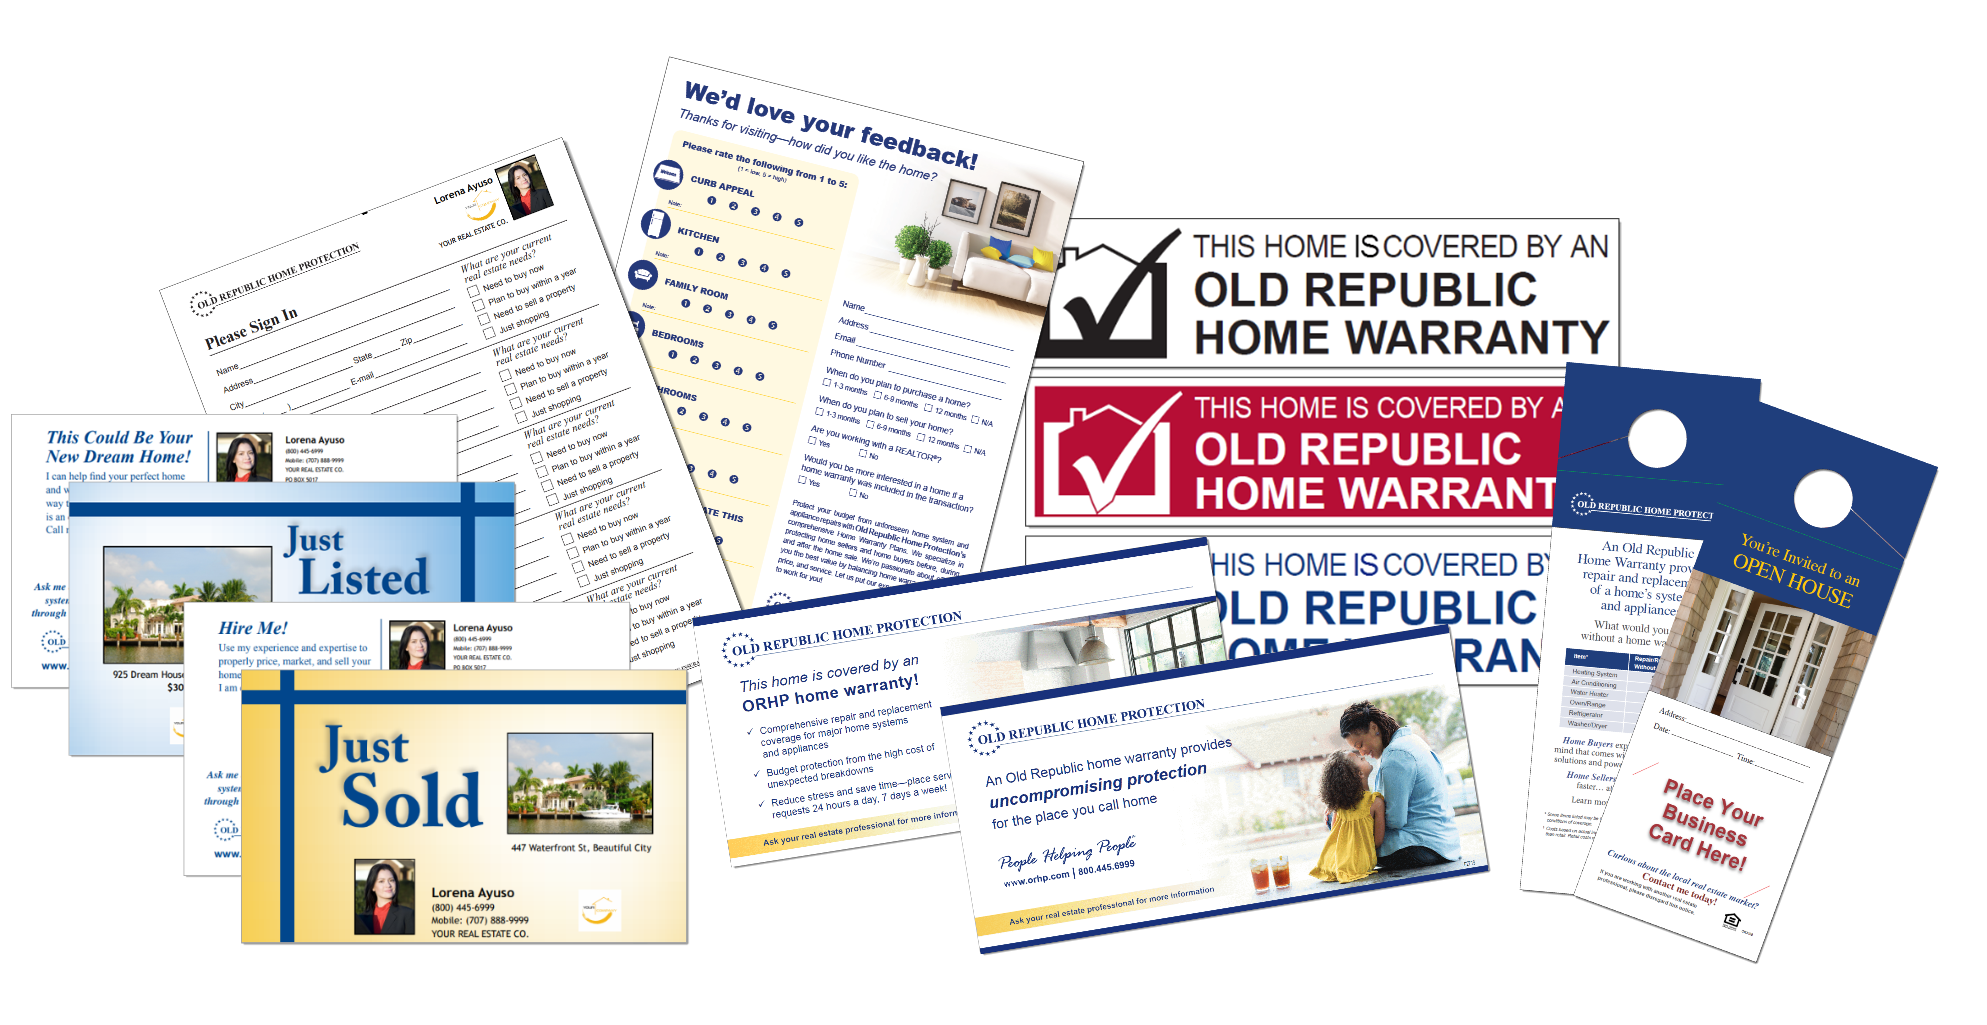 We have all the marketing tools you need for a successful open house.